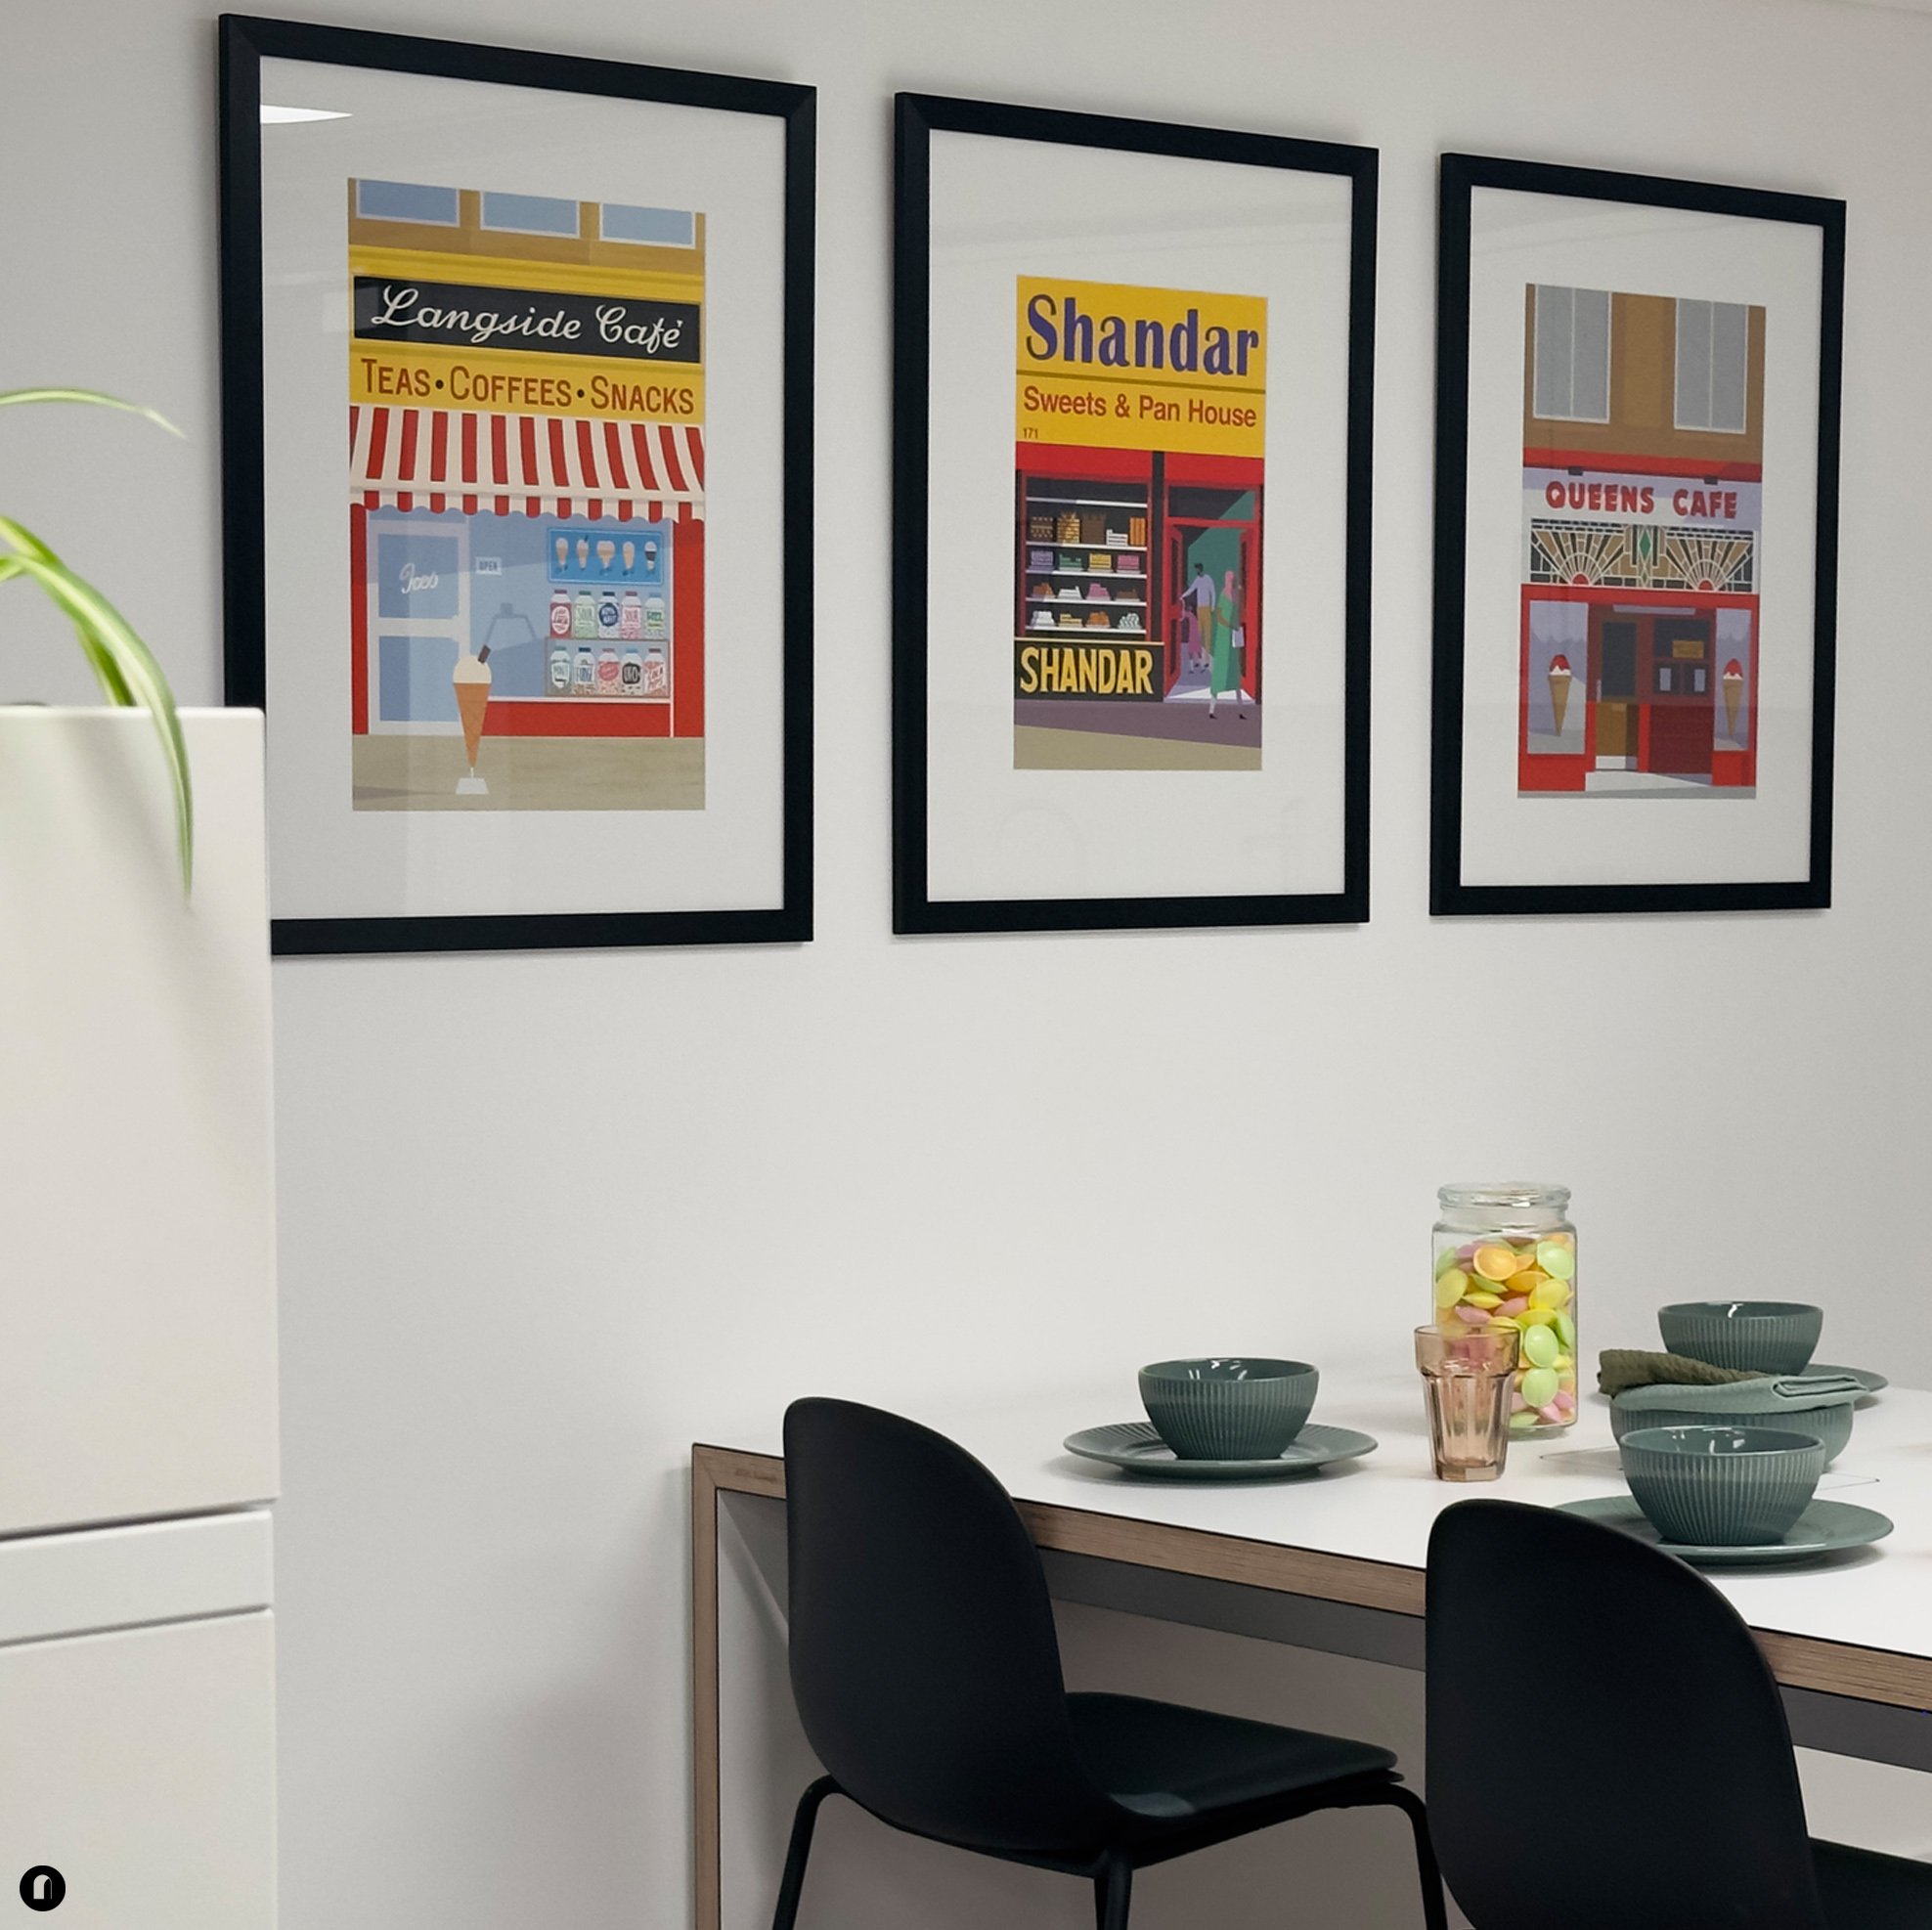 🎨 Arch Interiors took on the challenge of dressing the newly refurbished office spaces at West George Street in Glasgow 🎨

We had the pleasure of featuring various artworks by talented local artists, including those captured in the photo, art by @k